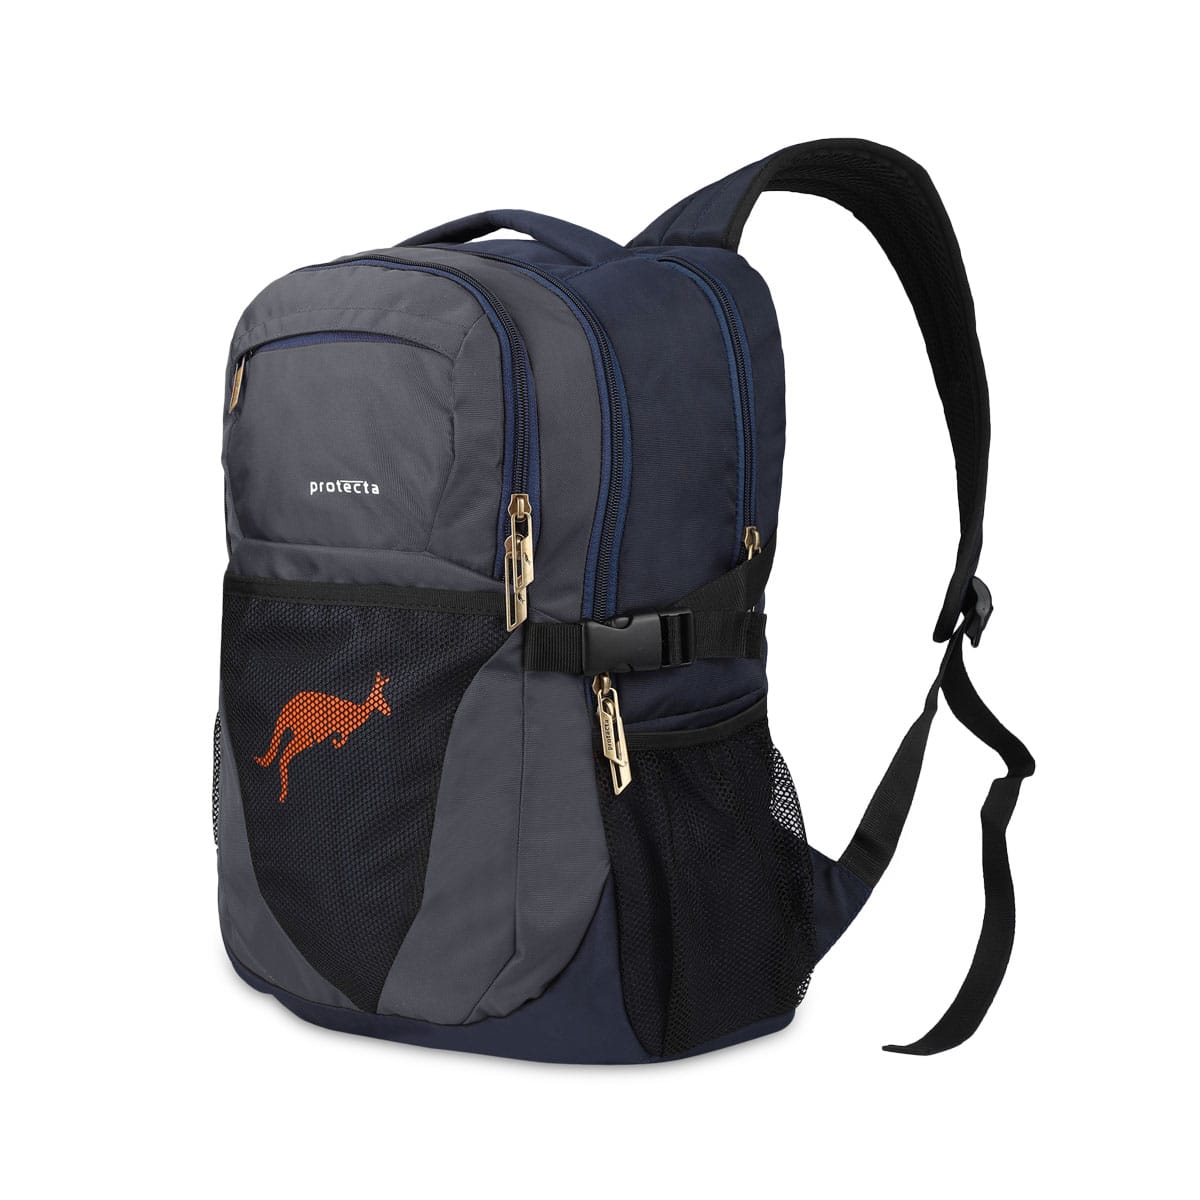 Navy-Grey | Protecta Enigma Laptop Backpack-1